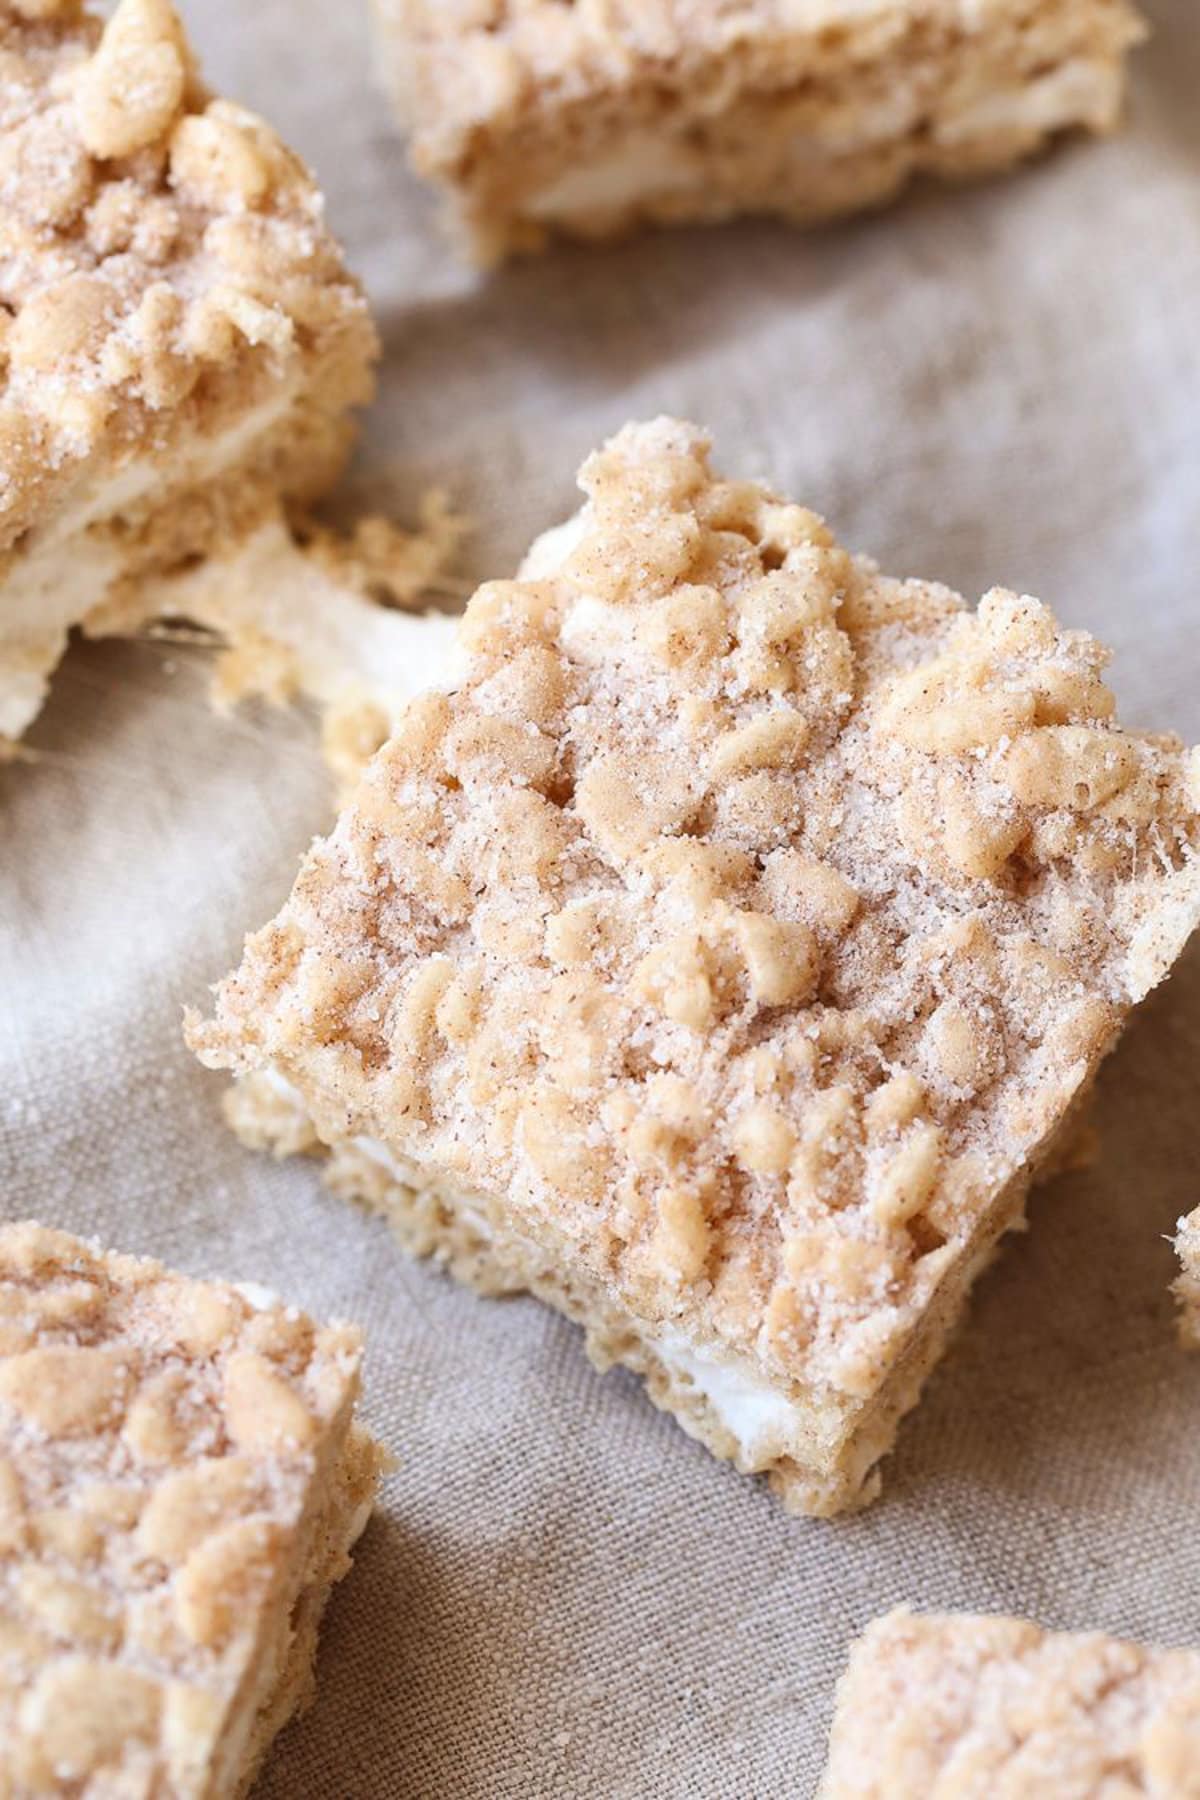 Snickerdoodle Rice Krispie Treats made with browned butter, extra marshmallows and cinnamon sugar. Made extra delicious with vanilla extract and a pinch of salt!